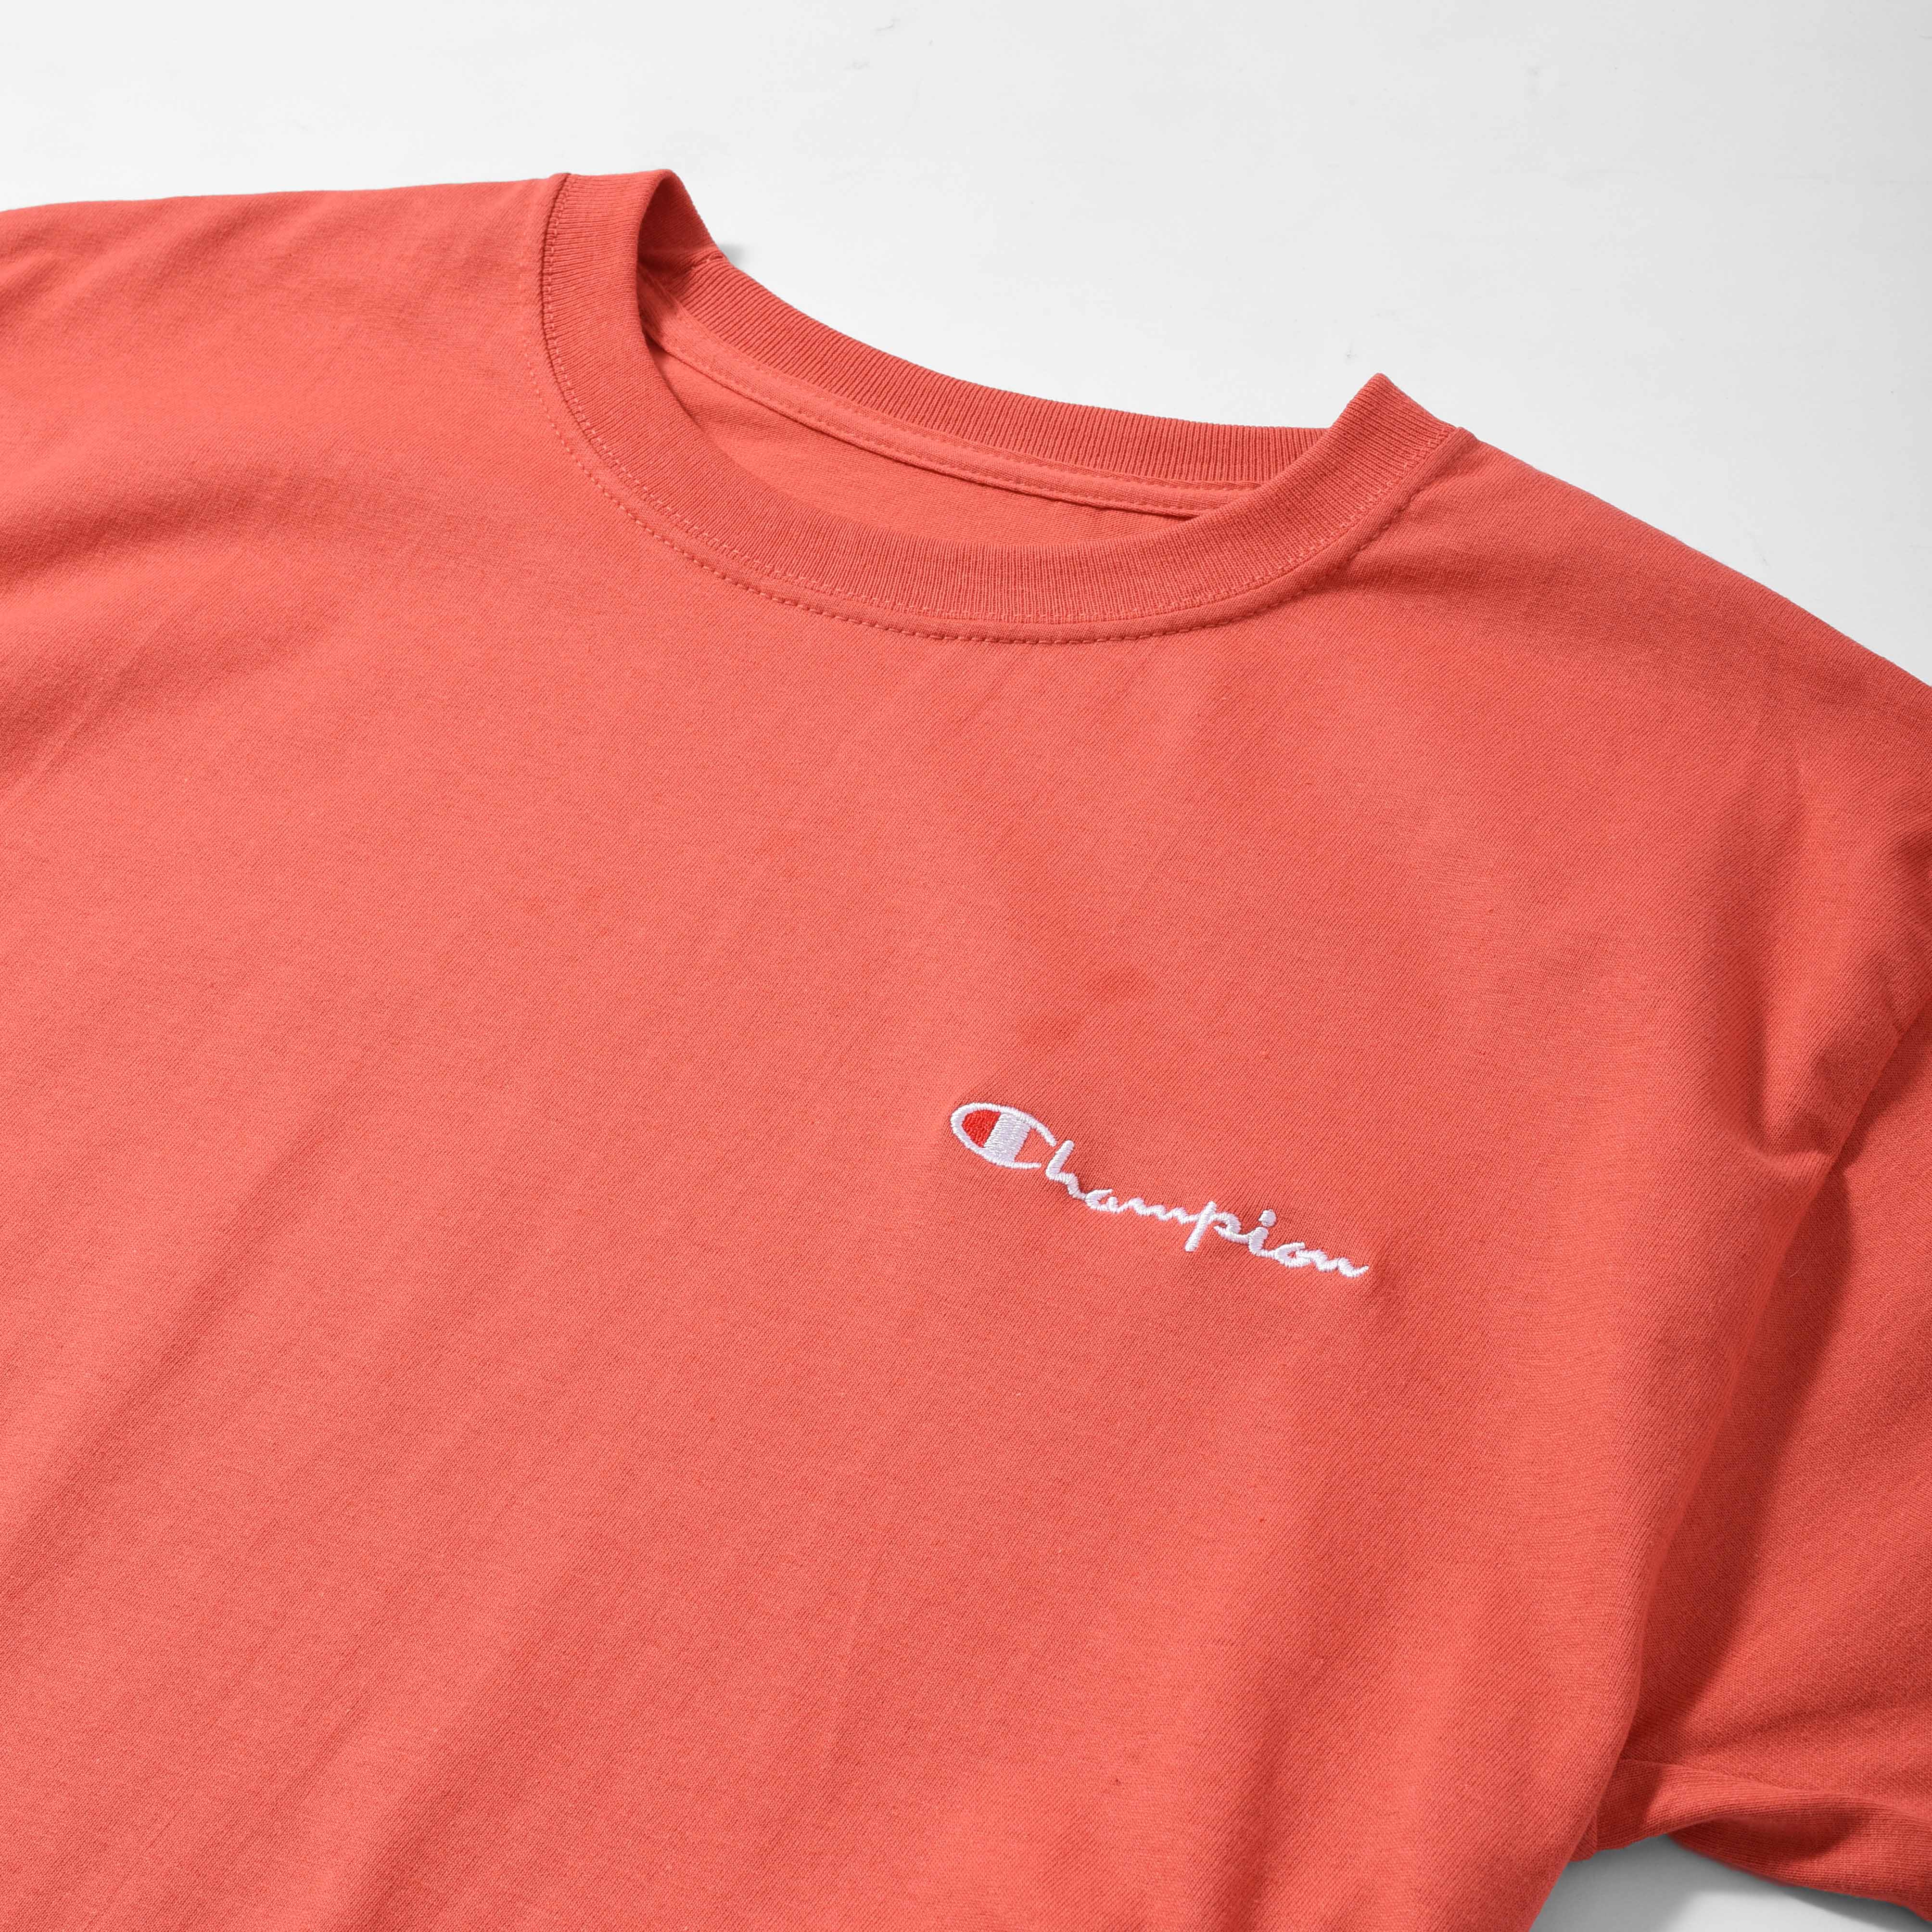 CHAMPION TAGLESS TSHIRT ,EMBROIDERED LOGO - RED RIVER CLAY